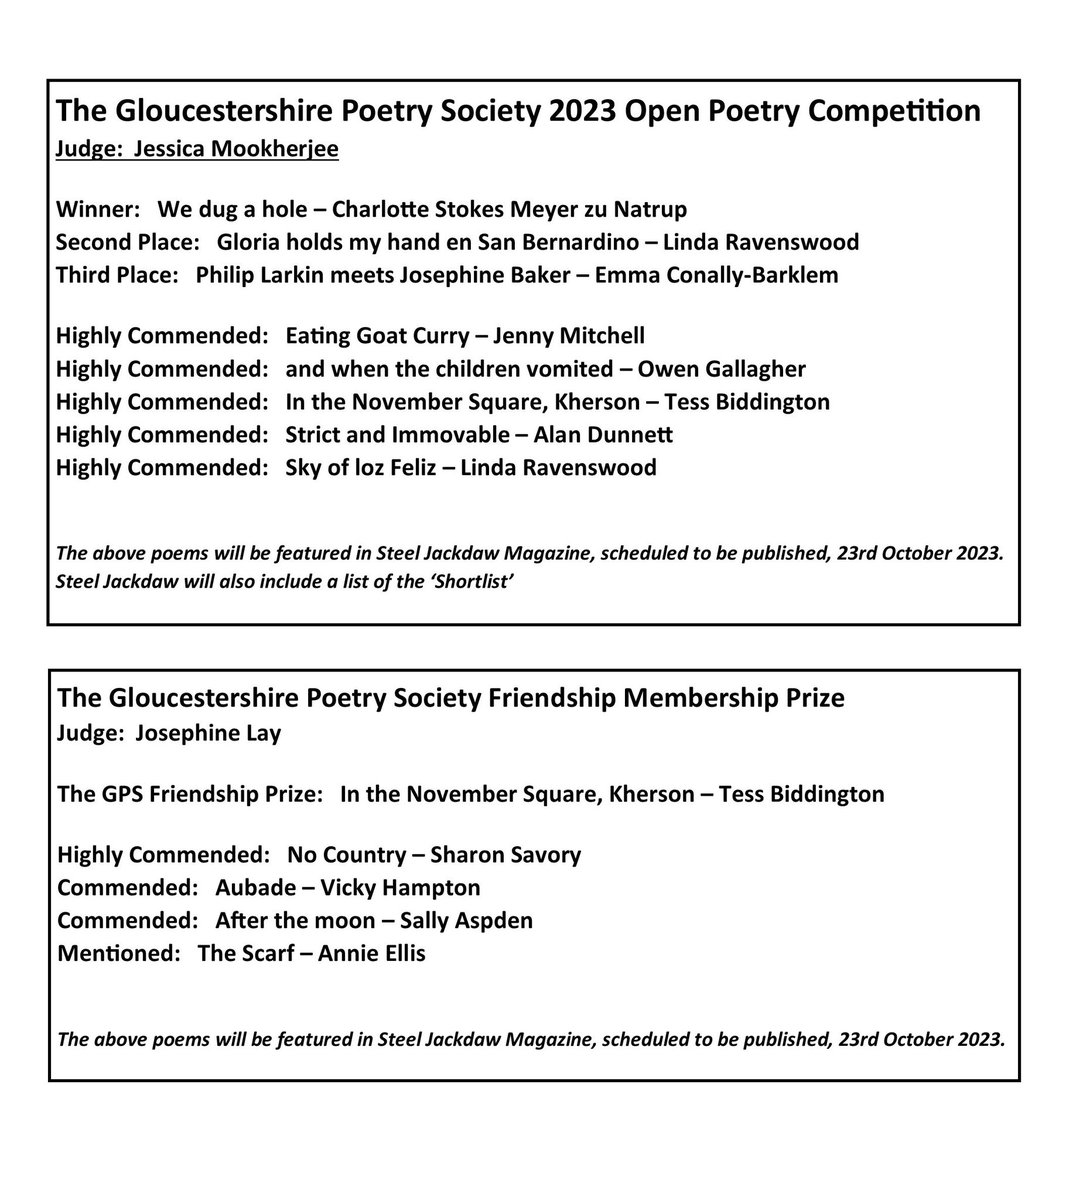 Here are the results of the @GlosPoetSociety Poetry Comp 2023. 😊 Congratulations to the winners: well done highly commended poets. 👏👏👏 Thank you to all poets who entered & thus supported the GPS 🙏 Special thanks to our wonderful judge @jessmkrjy 💙